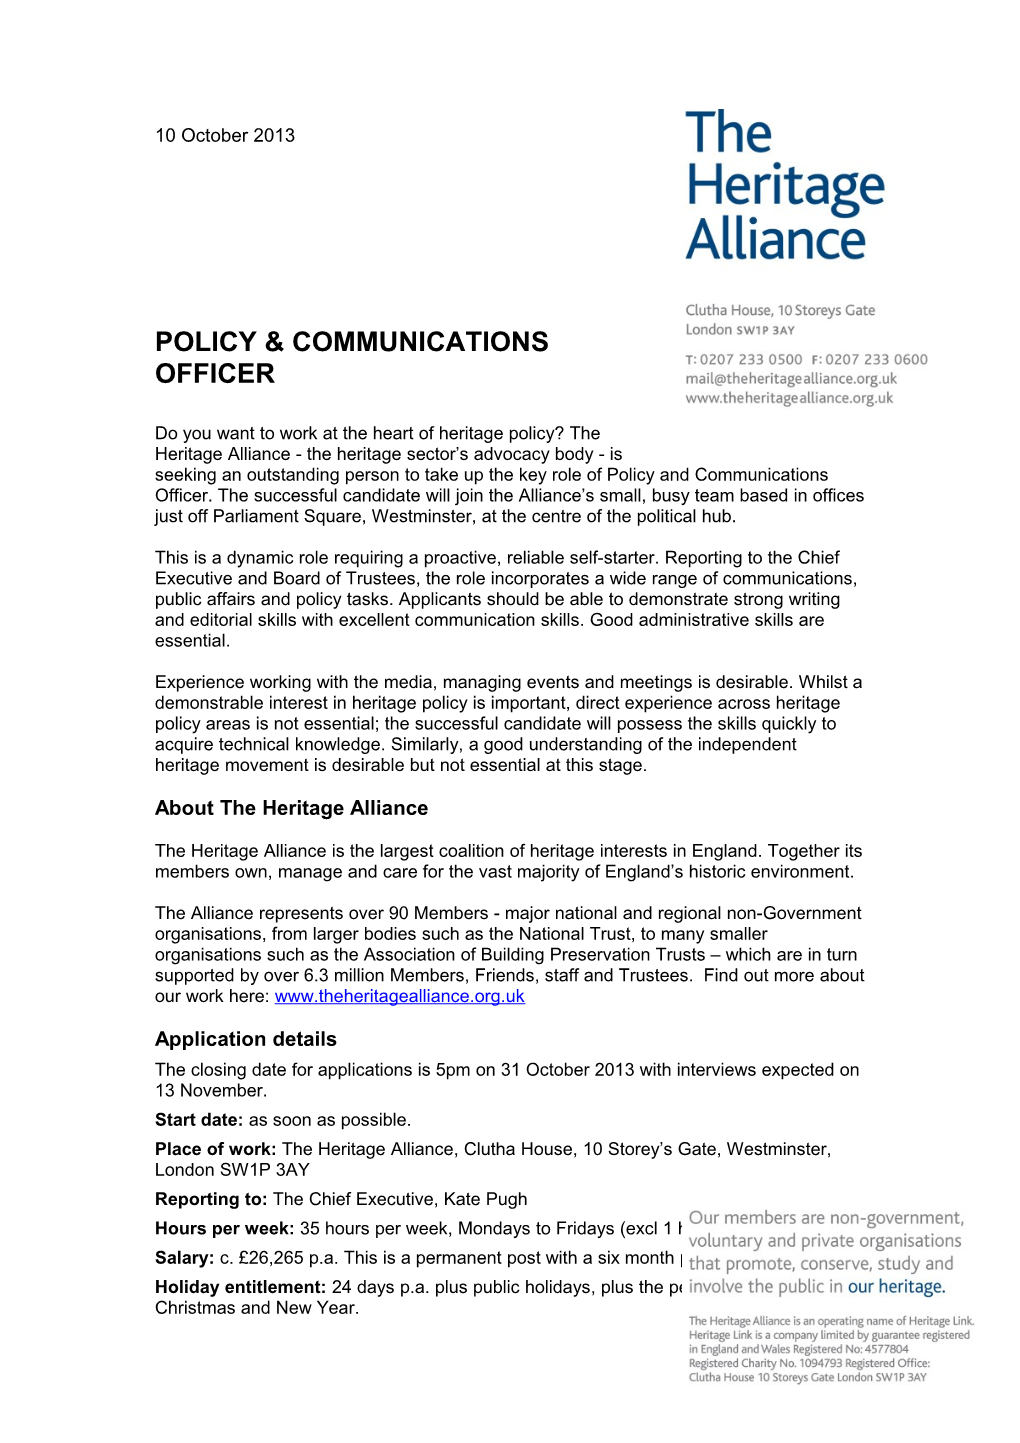 Policy & Communications Officer